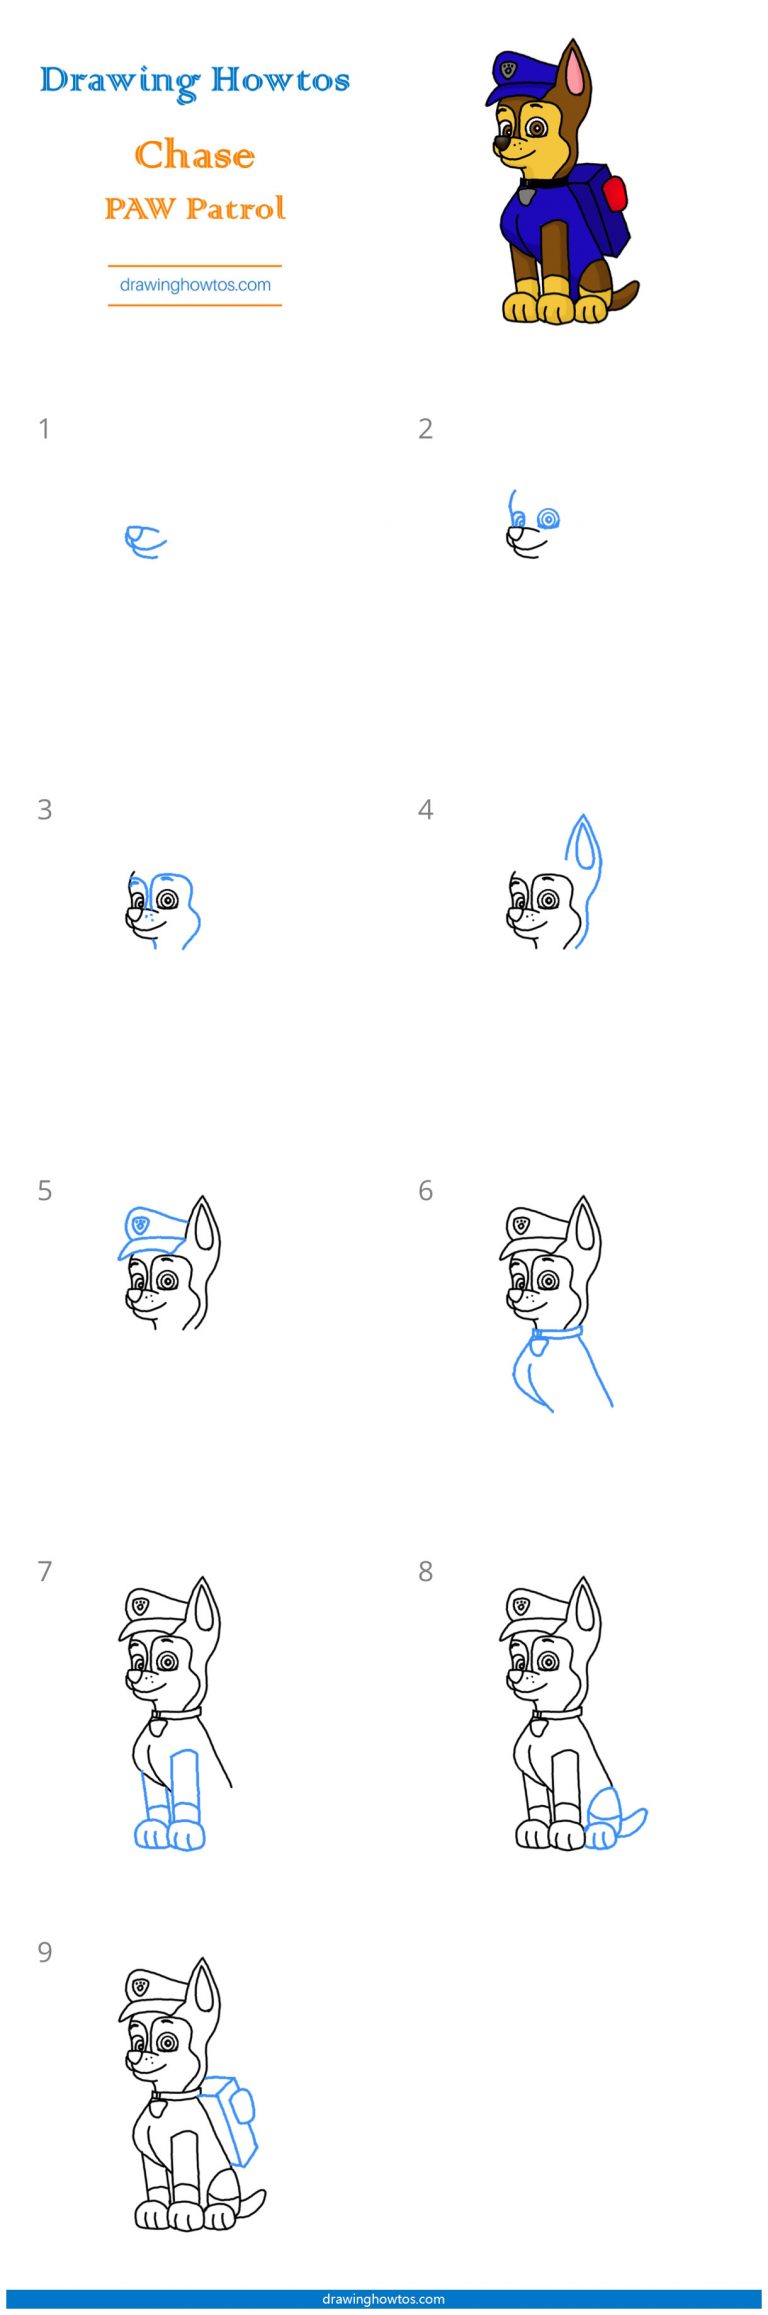 How to Draw Chase from Paw Patrol - Step by Step Easy Drawing Guides